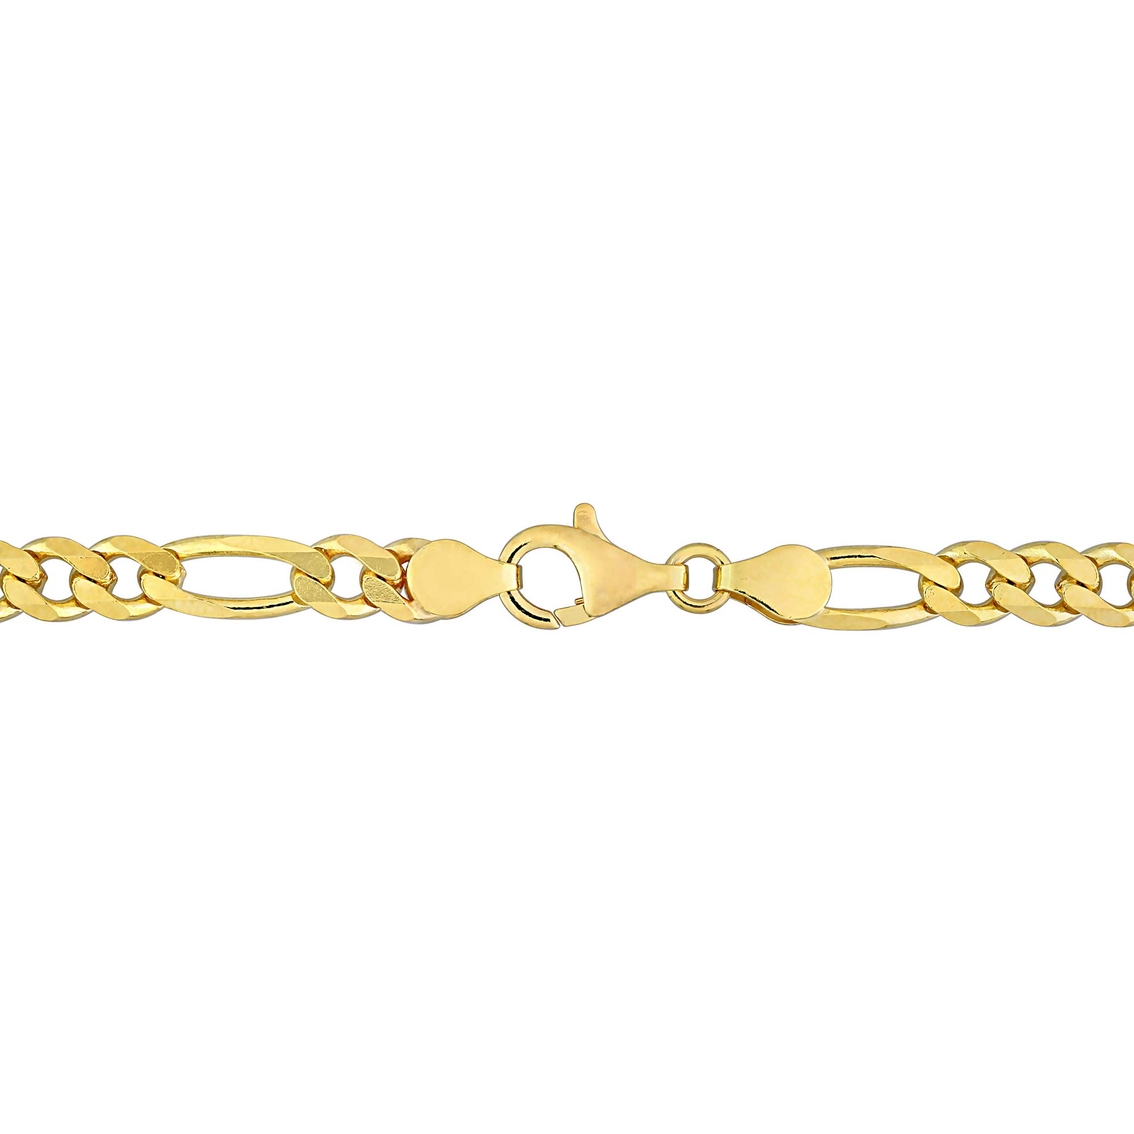 Sofia B. 18K Gold Plated Sterling Silver 5.5mm Figaro Chain Bracelet - Image 2 of 2